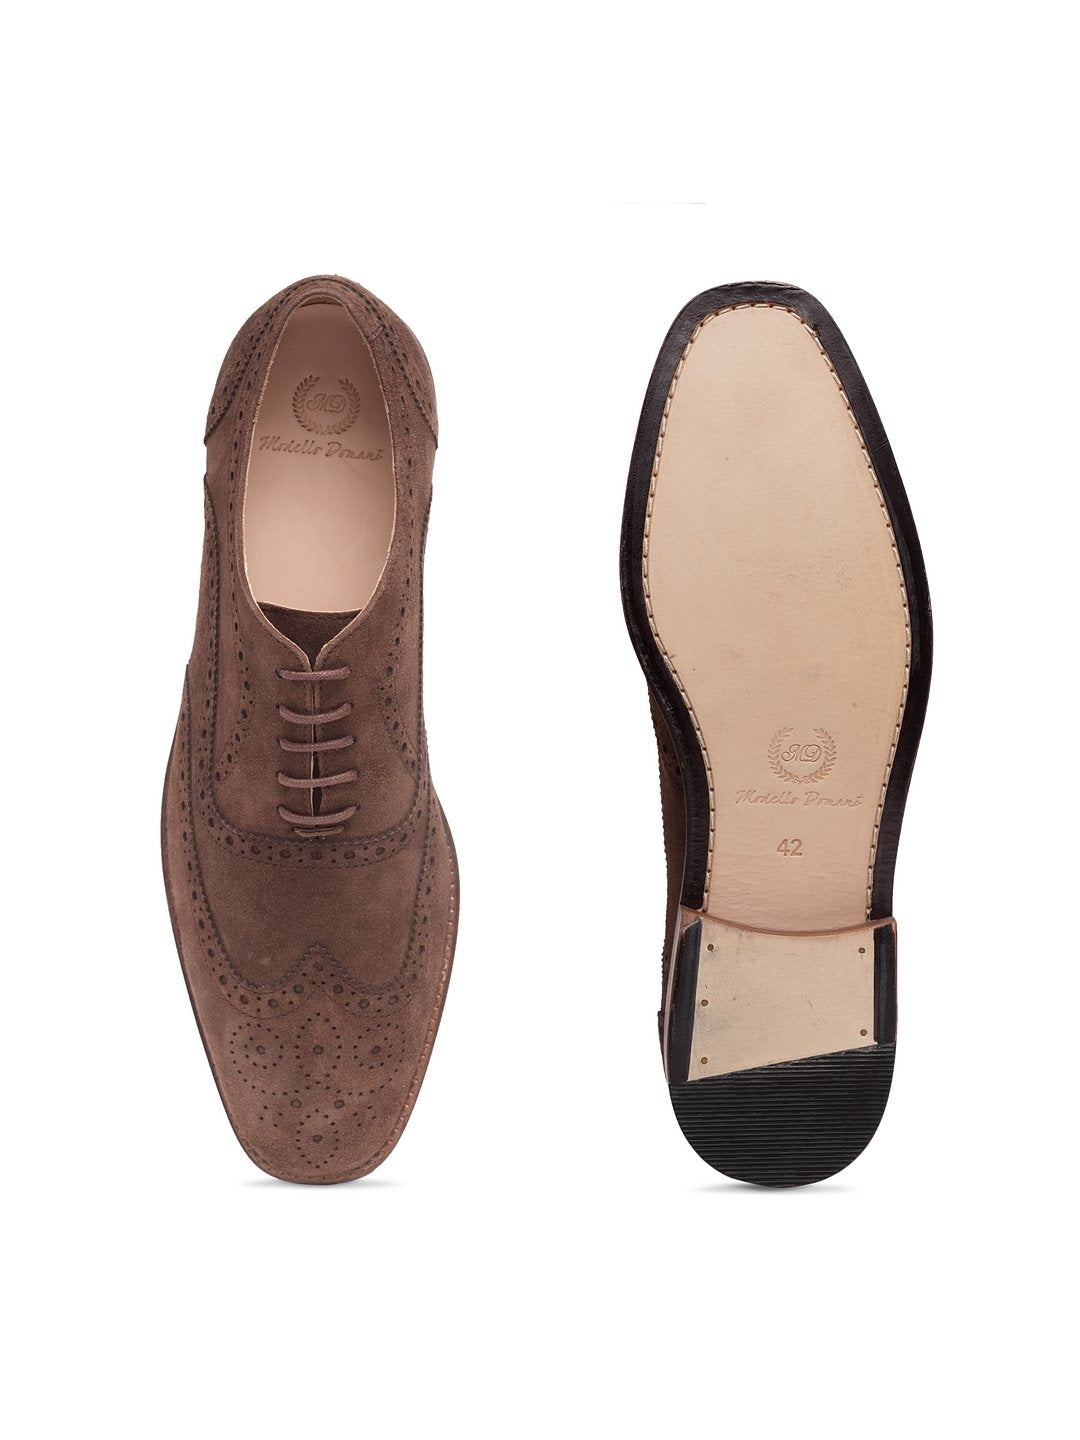 Italian Calf Suede Brogues (Brown Limited Edition)